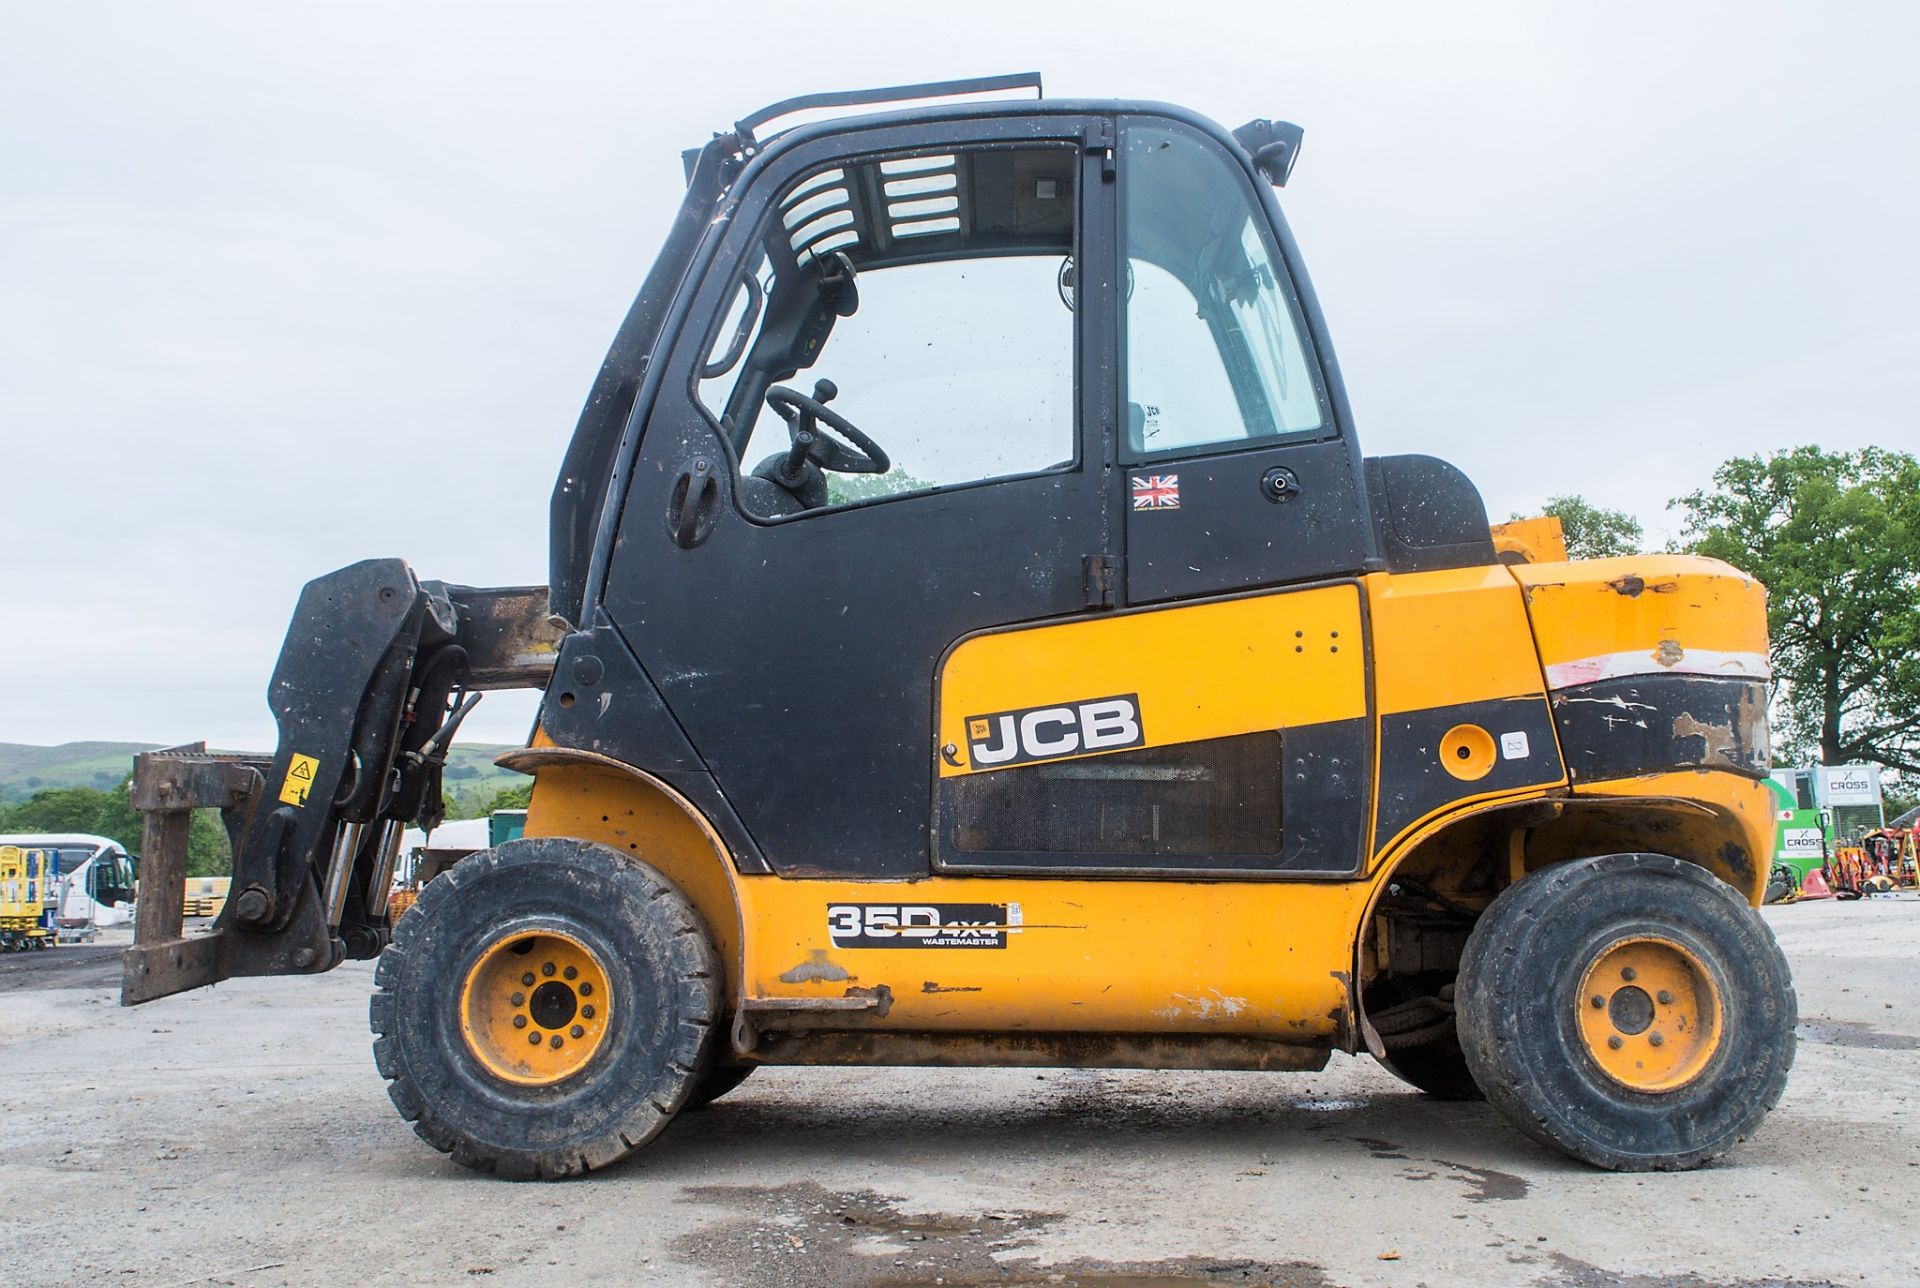 JCB TLT 35D Wastemaster 4 wheel drive telescopic fork lift truck Year: 2013 S/N: 11512060 Recorded - Image 7 of 18